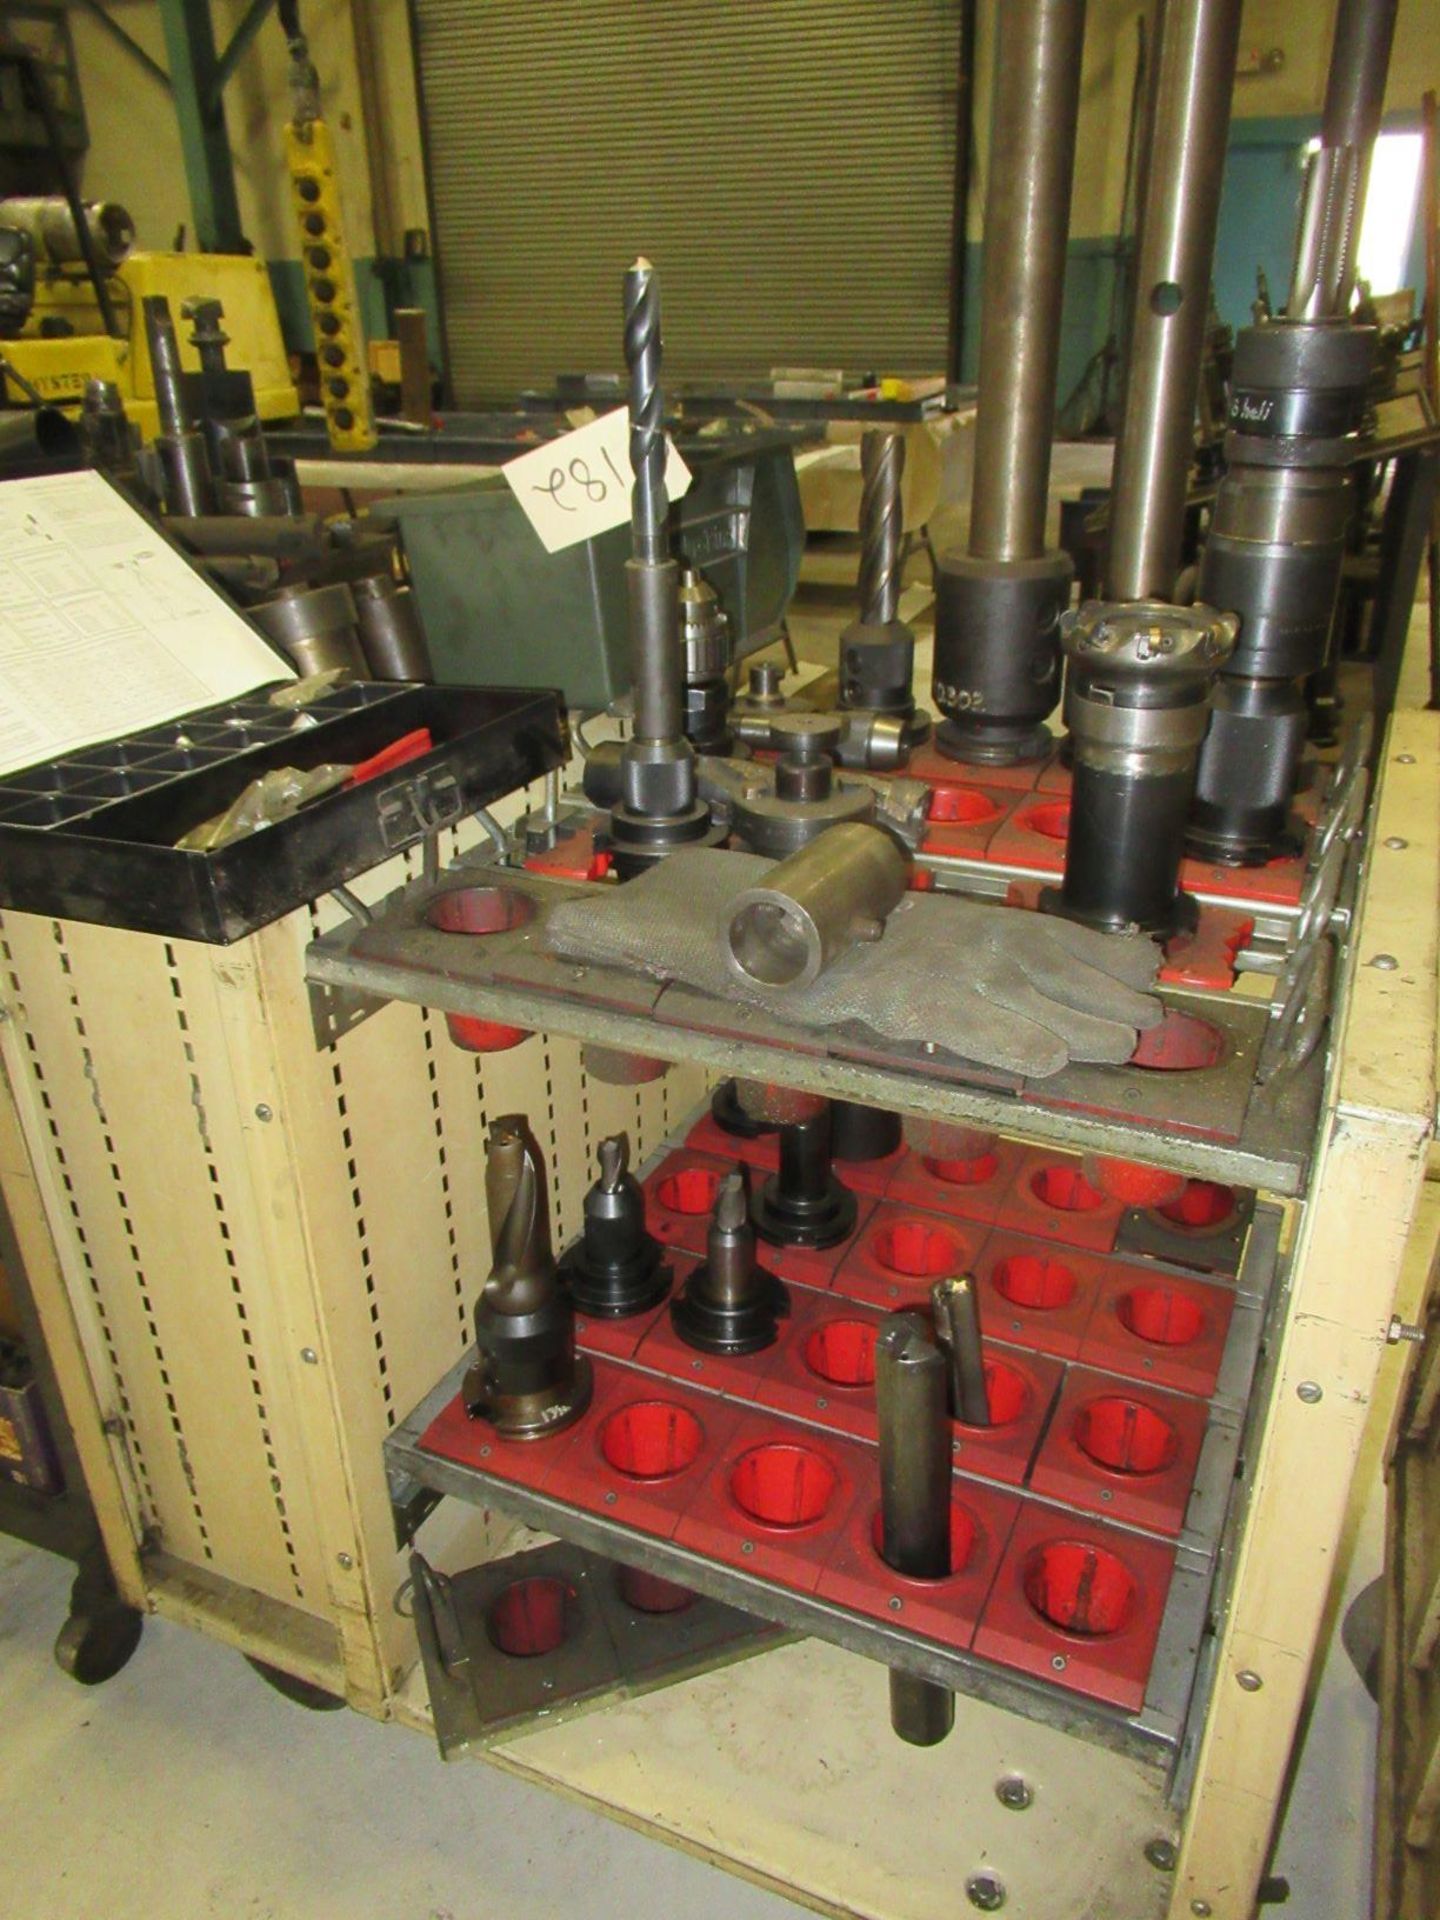 LOT OF #50 TAPER TOOL HOLDERS WITH CARTS - Image 3 of 3